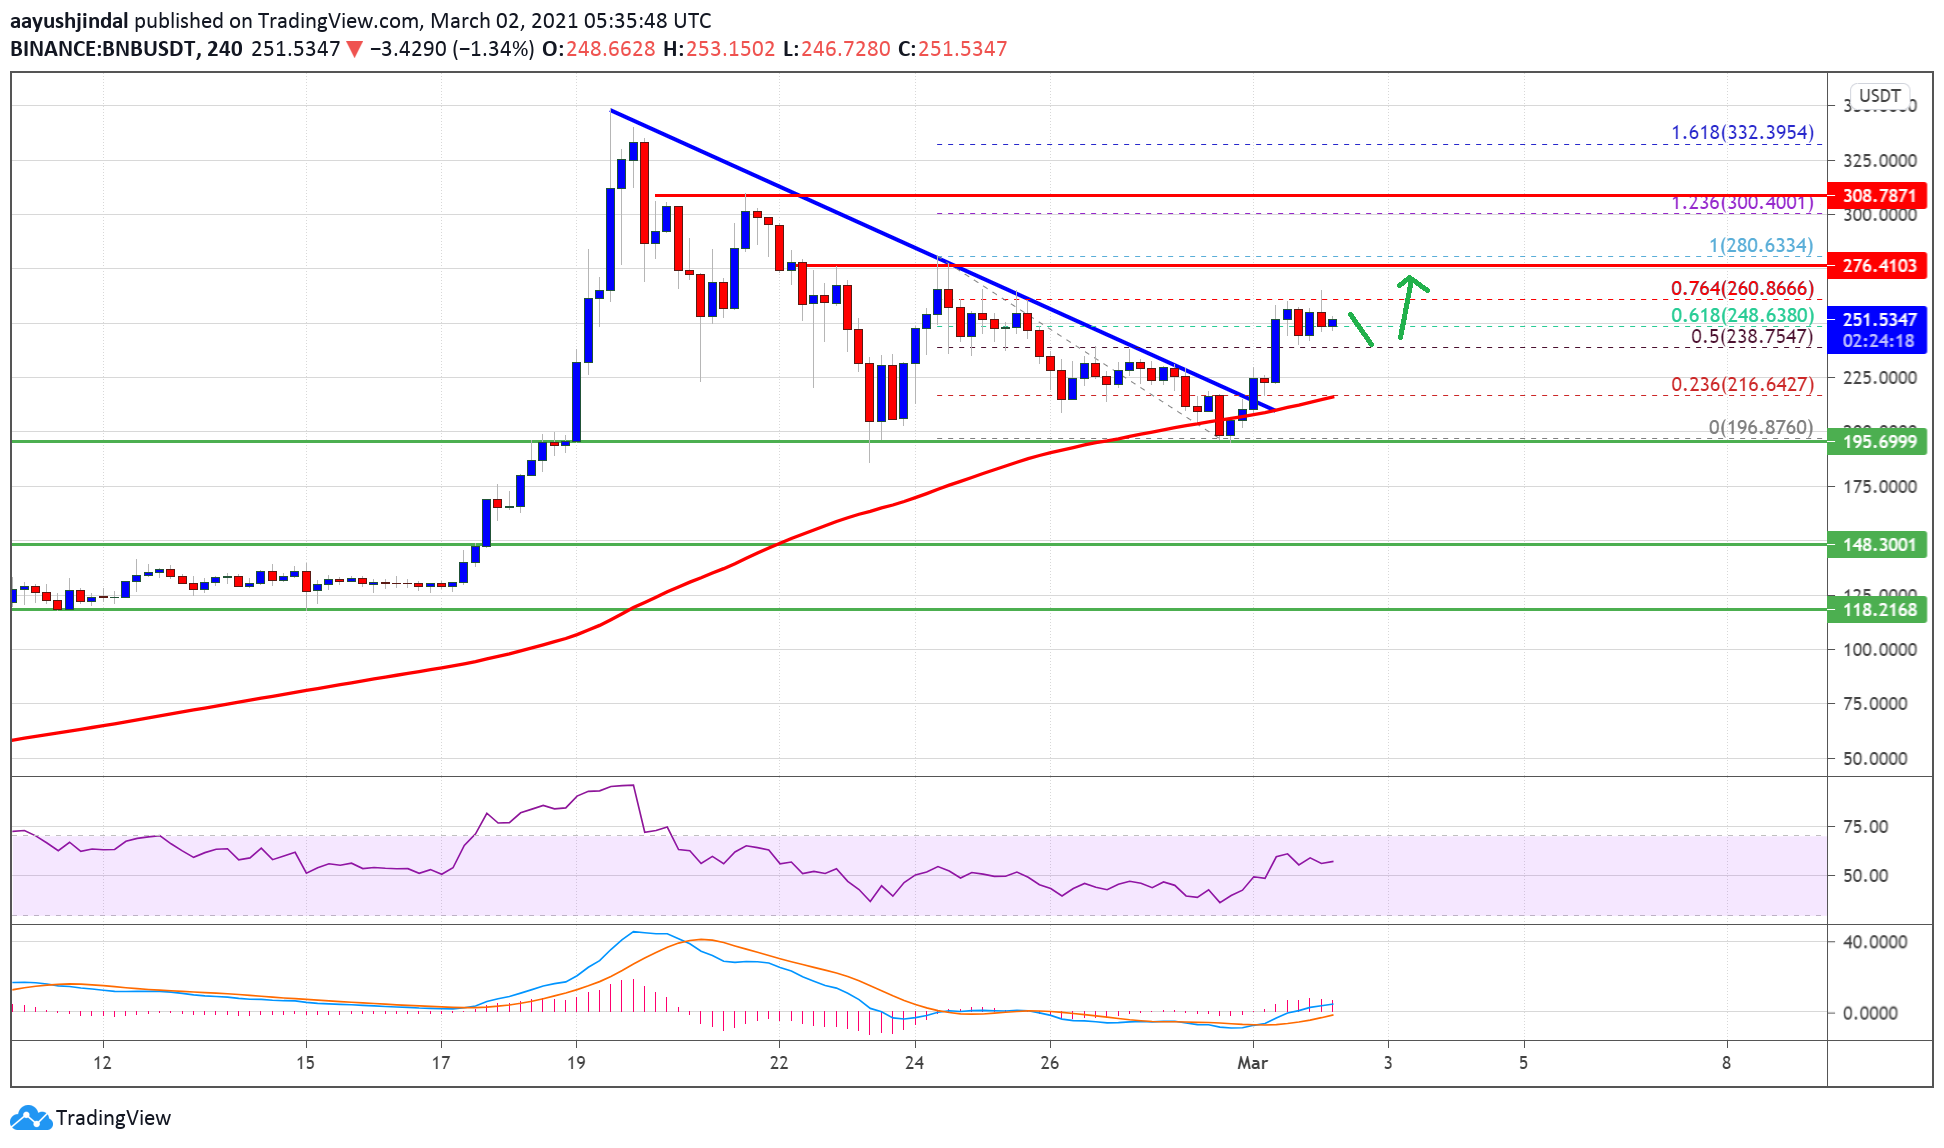 Charted: Binance Coin (BNB) Gains Momentum, Why Dips Are Attractive